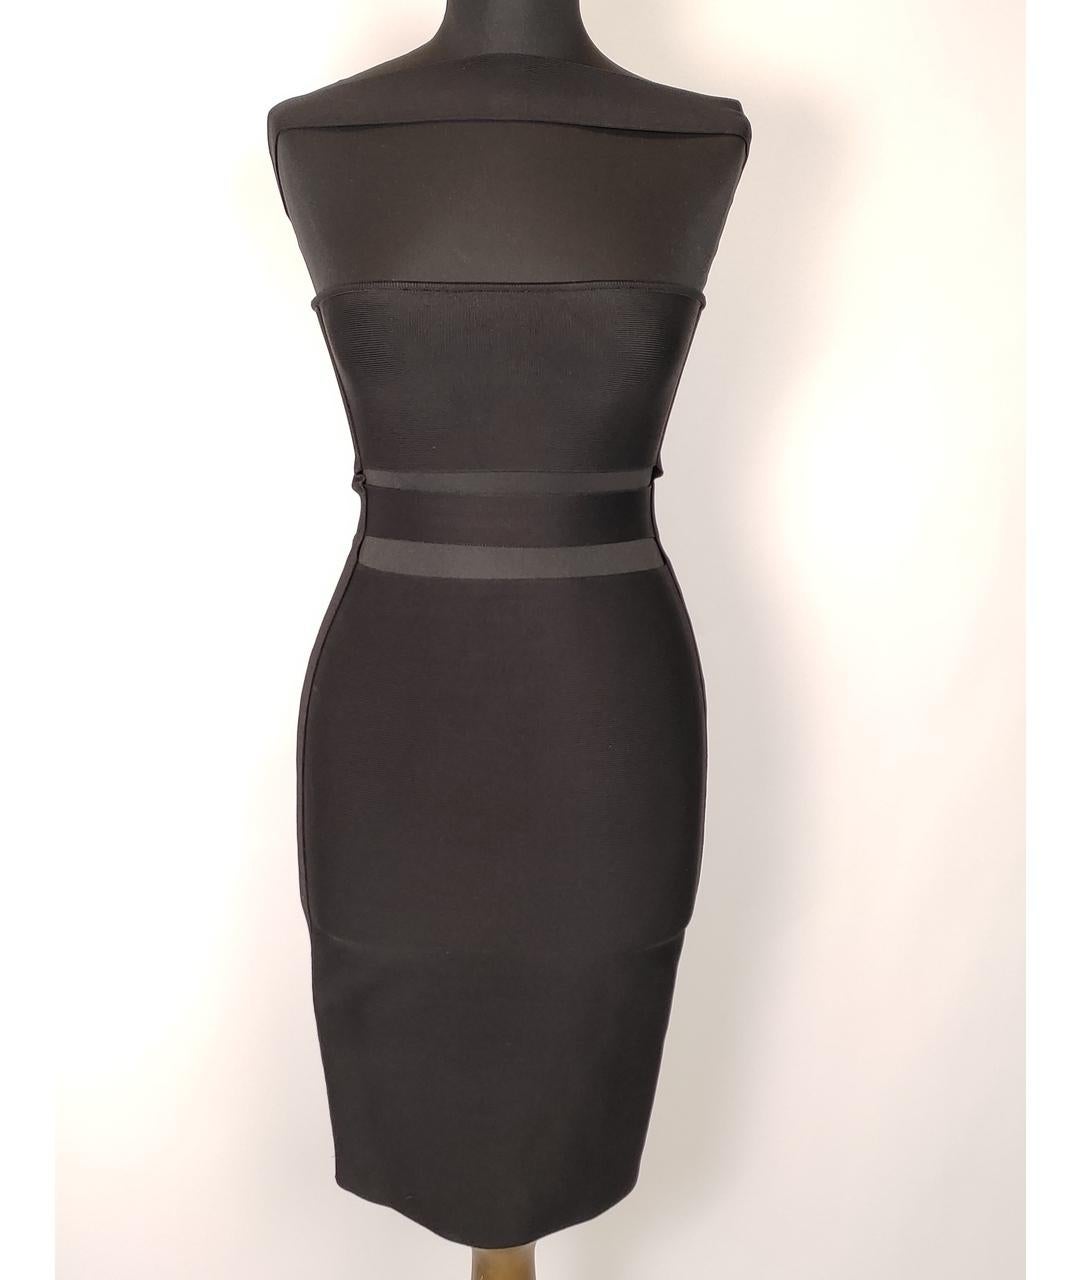 BALMAIN


Black viscose dress

Back zip closure 



Size 36 or US 4



Made in France

Pre-owned. Great condition. 

 100% authentic guarantee 

       PLEASE VISIT OUR STORE FOR MORE GREAT ITEMS 
OS